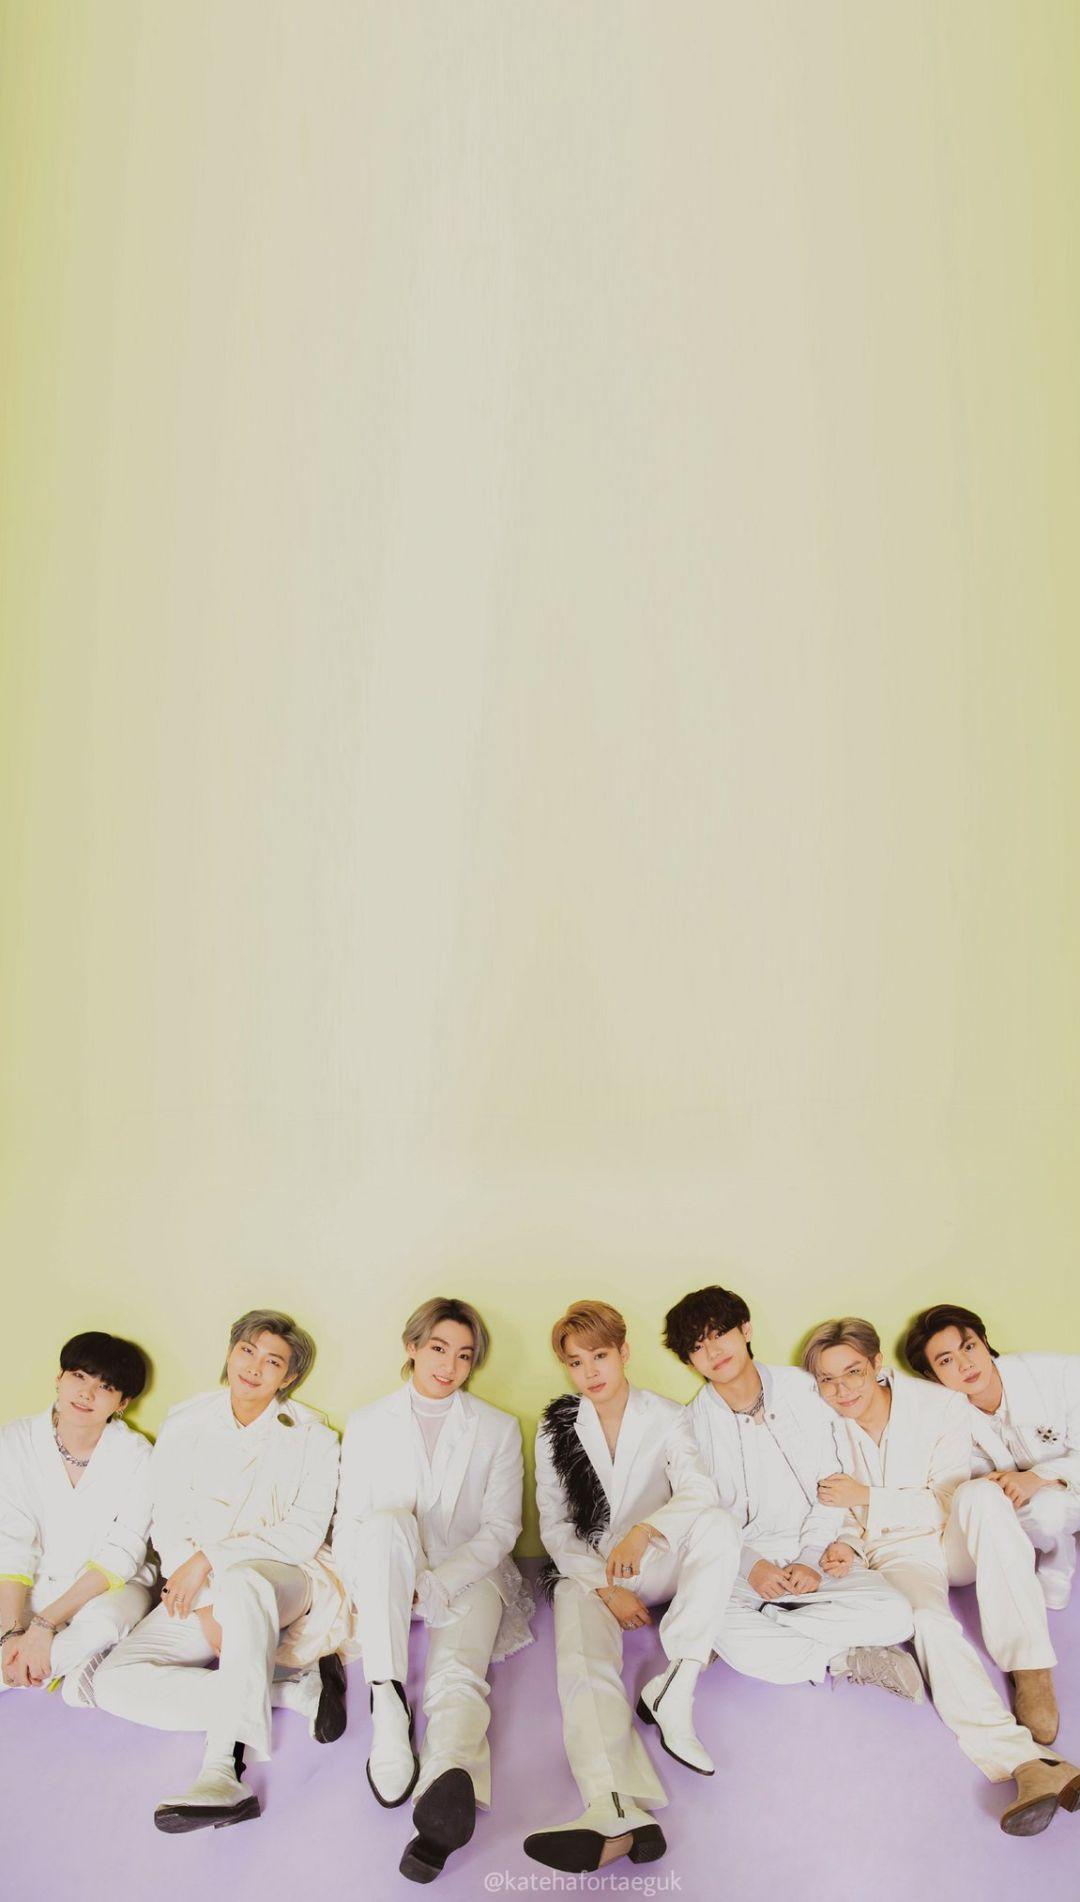 Bts 2022 Wallpapers - Top Free Bts 2022 Backgrounds - WallpaperAccess